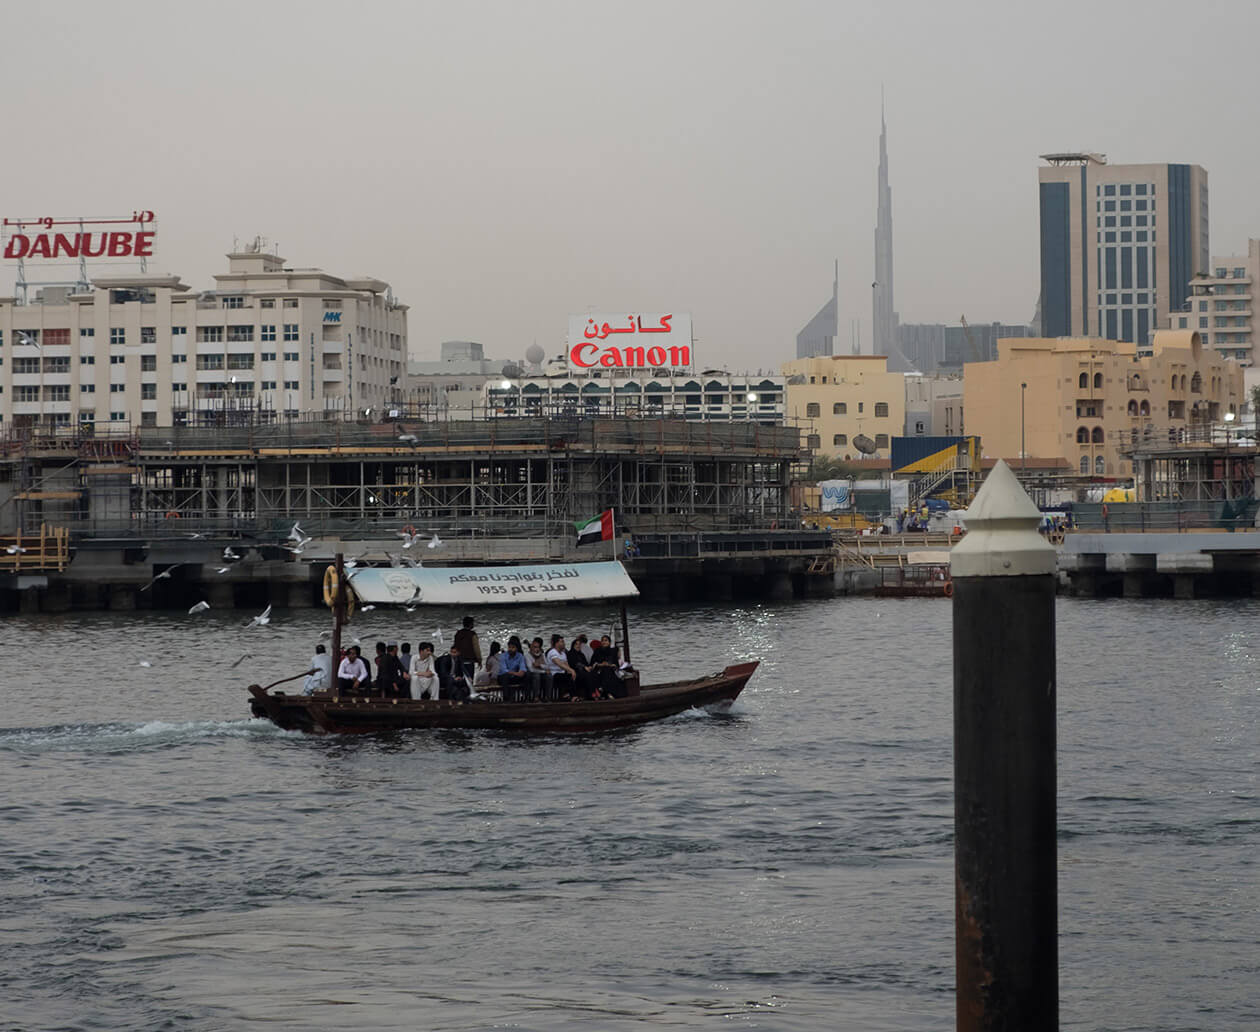 A traditional abra ferry crossing the Dubai Creek with the Burj Khalifa in the distance